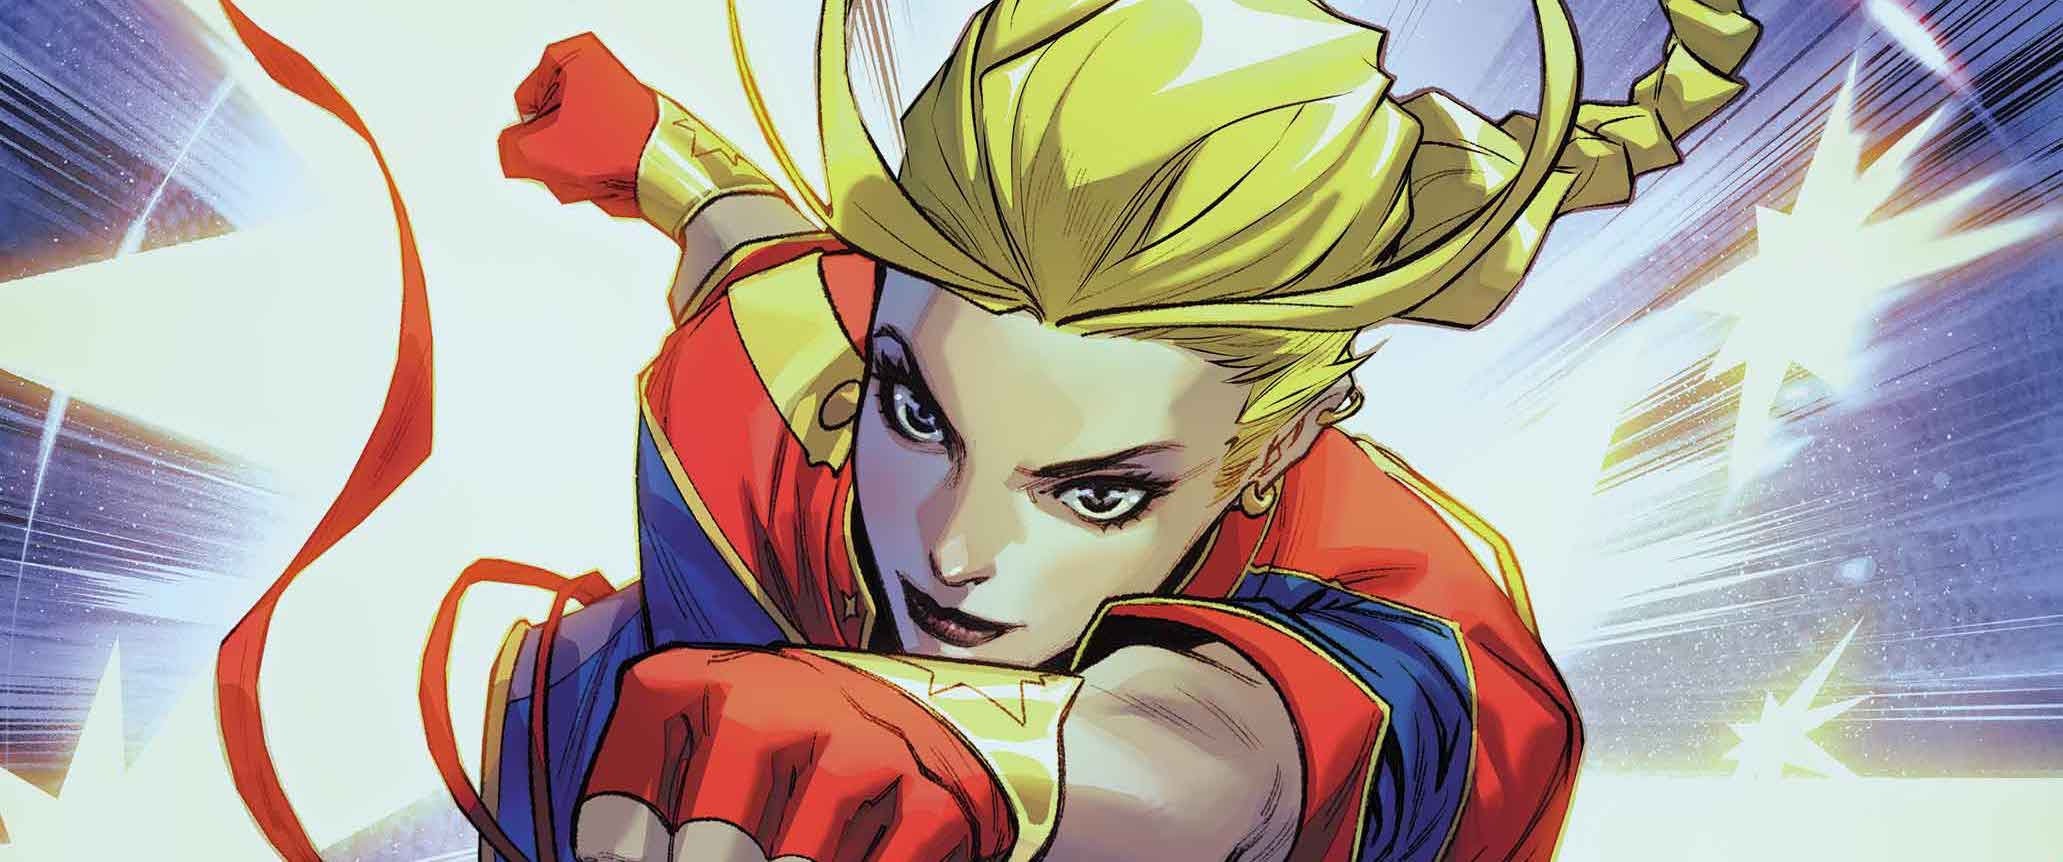 'Captain Marvel' #1 is an exciting start with new characters